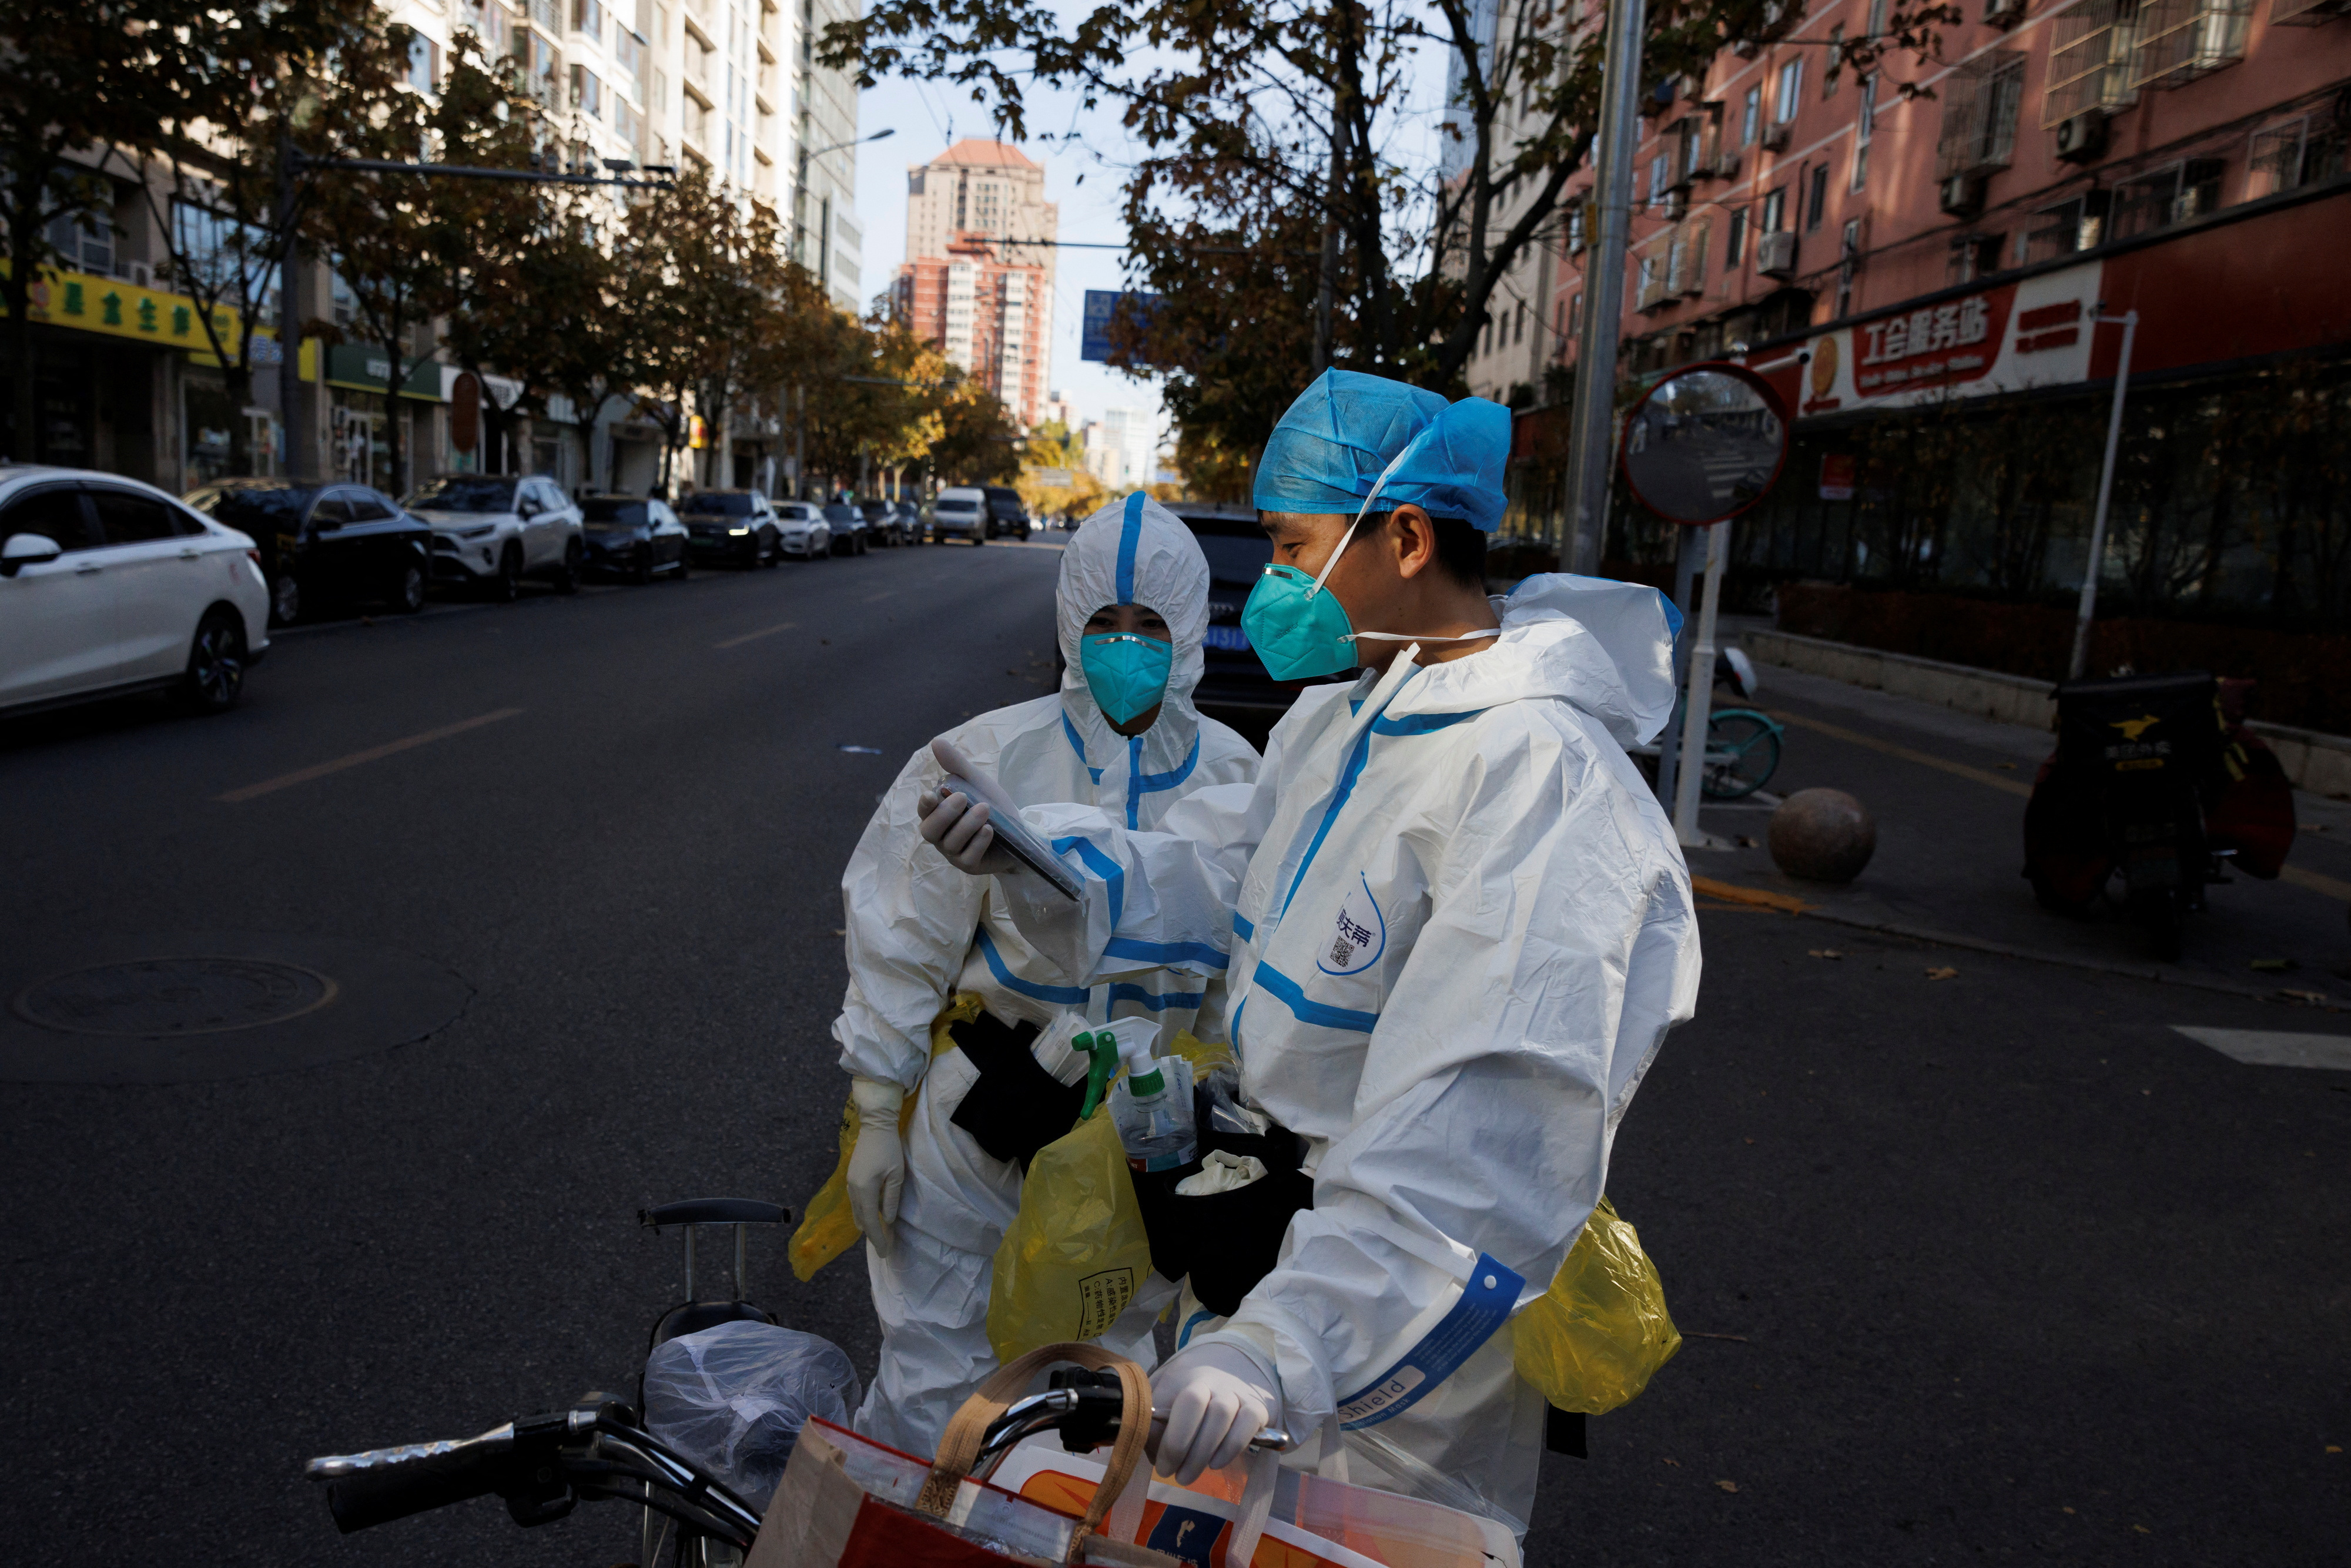 Pandemic prevention workers in protective suits stand on a street as outbreaks of the coronavirus disease (COVID-19) continue in Beijing.  REUTERS/Thomas Peter